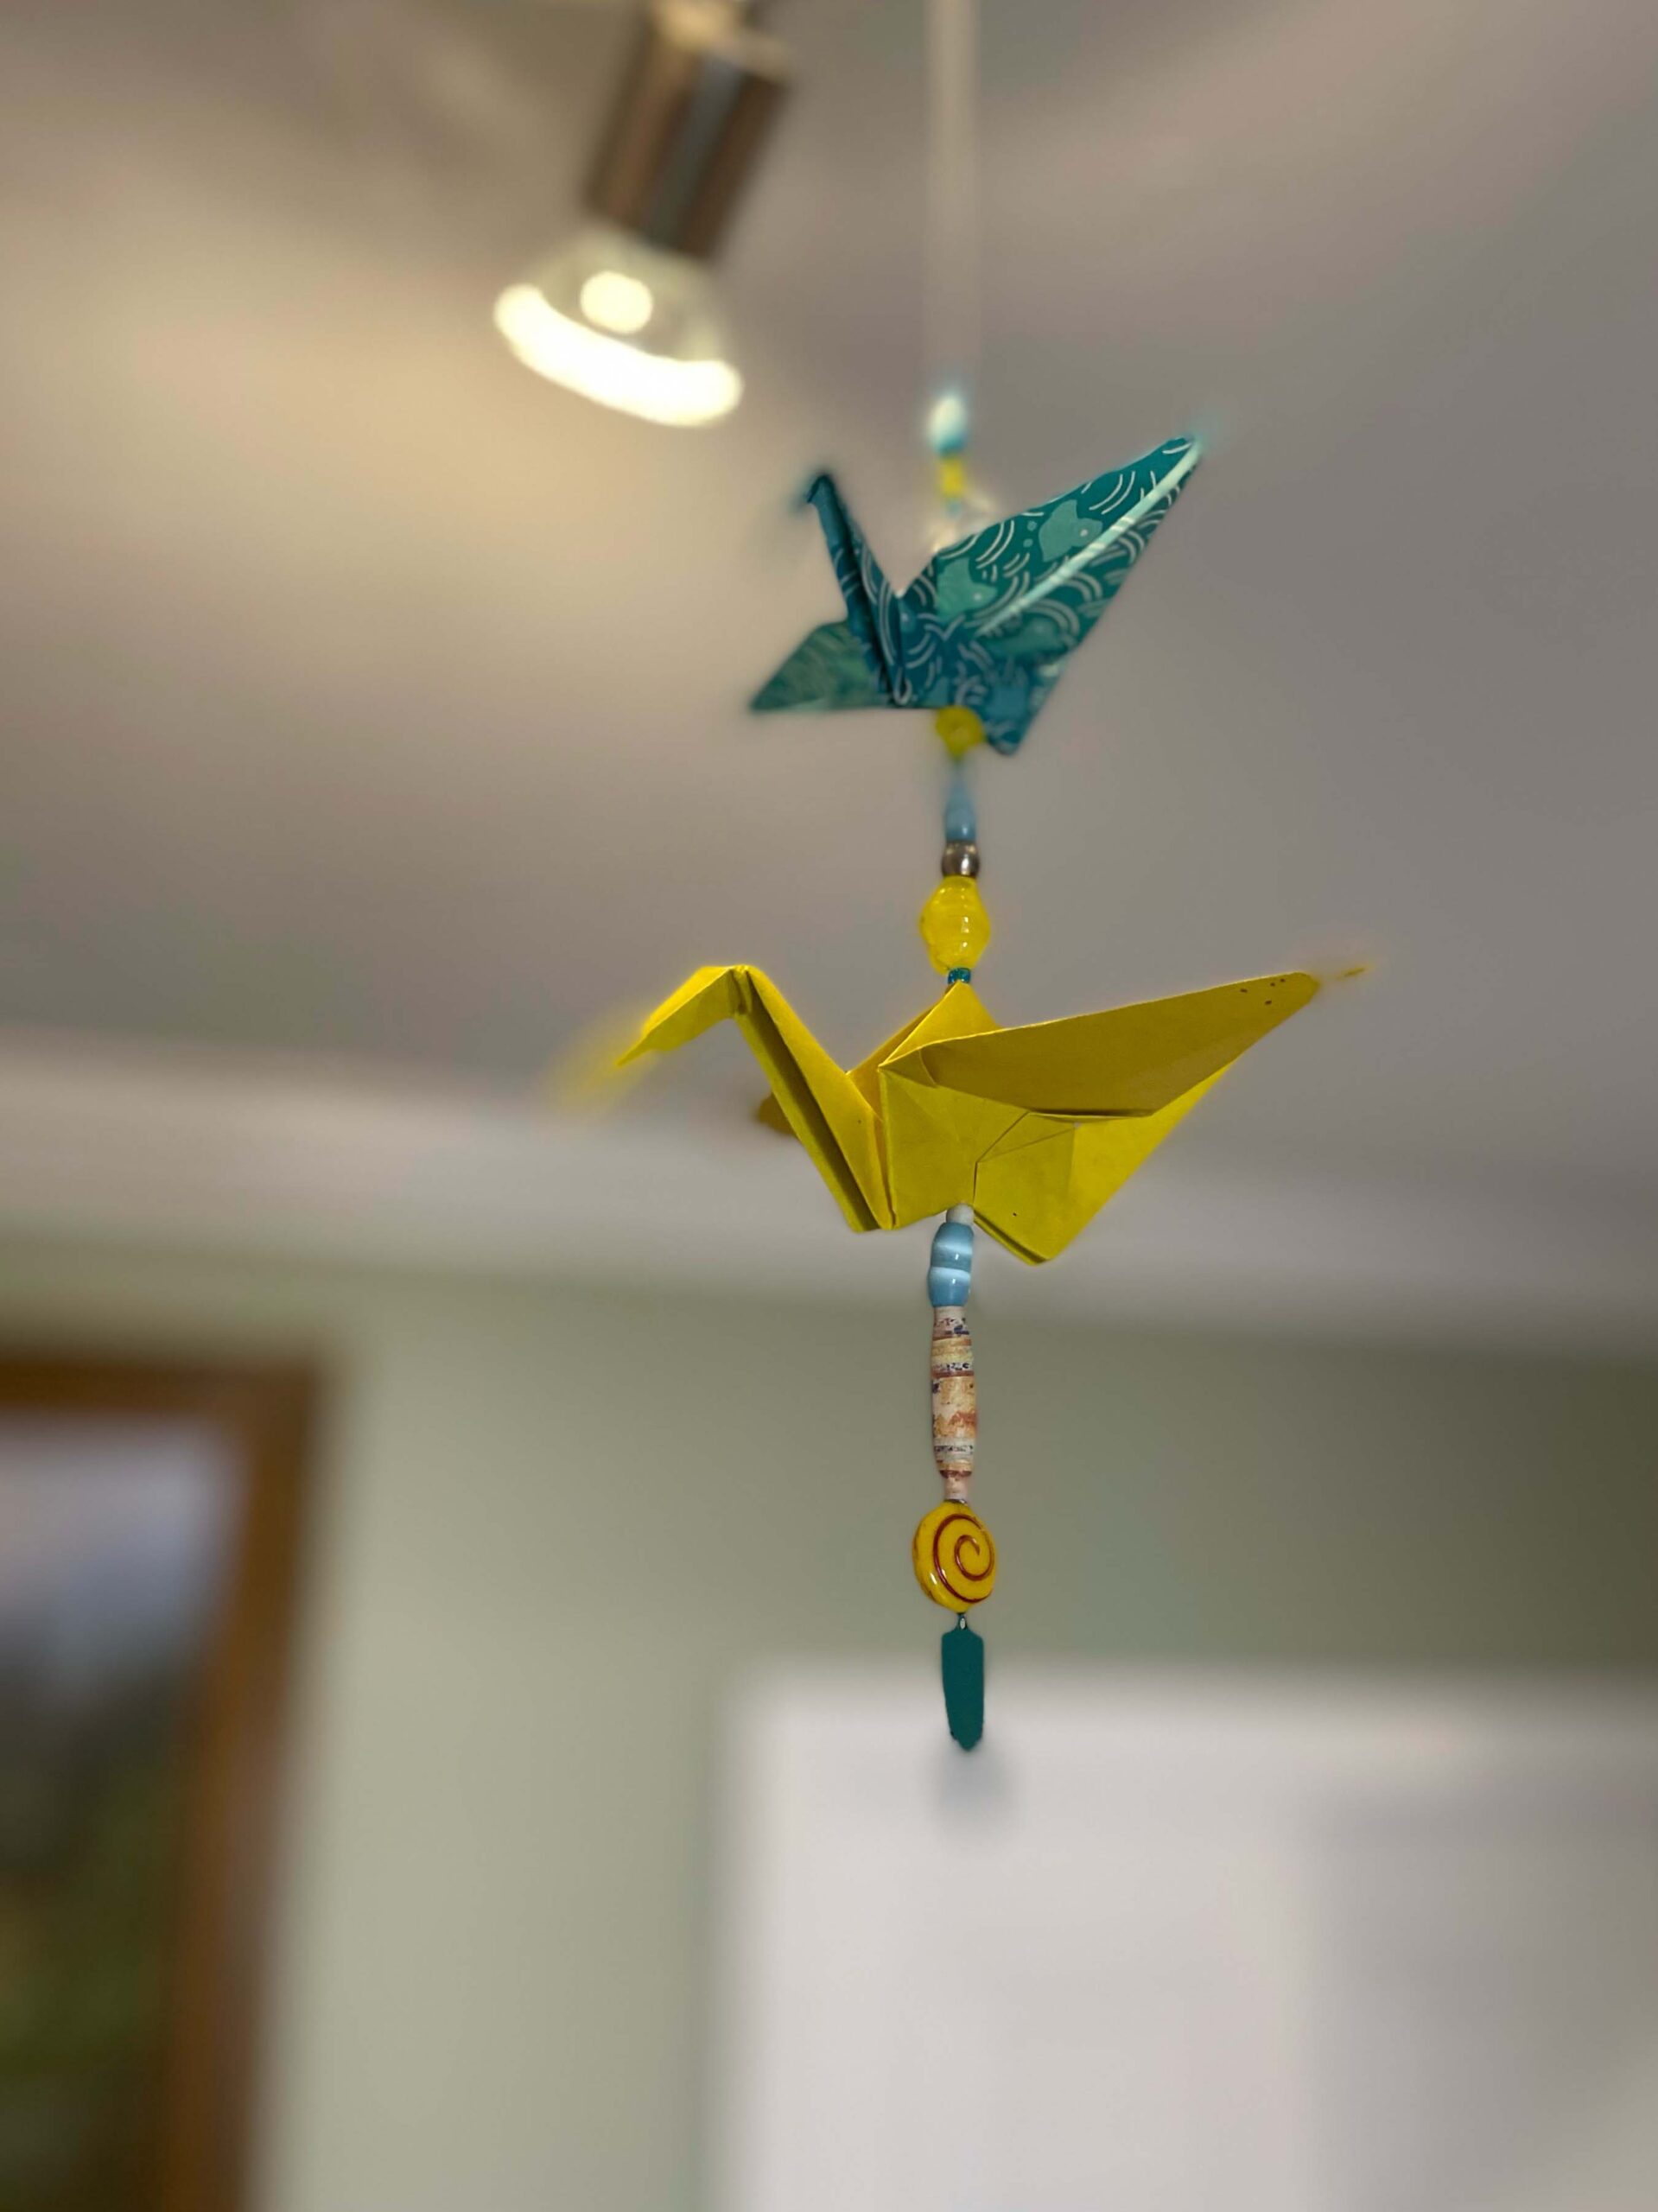 Origami crane mobile | San Luis Valley Therapeutic Massage LLC supports your journey of healing